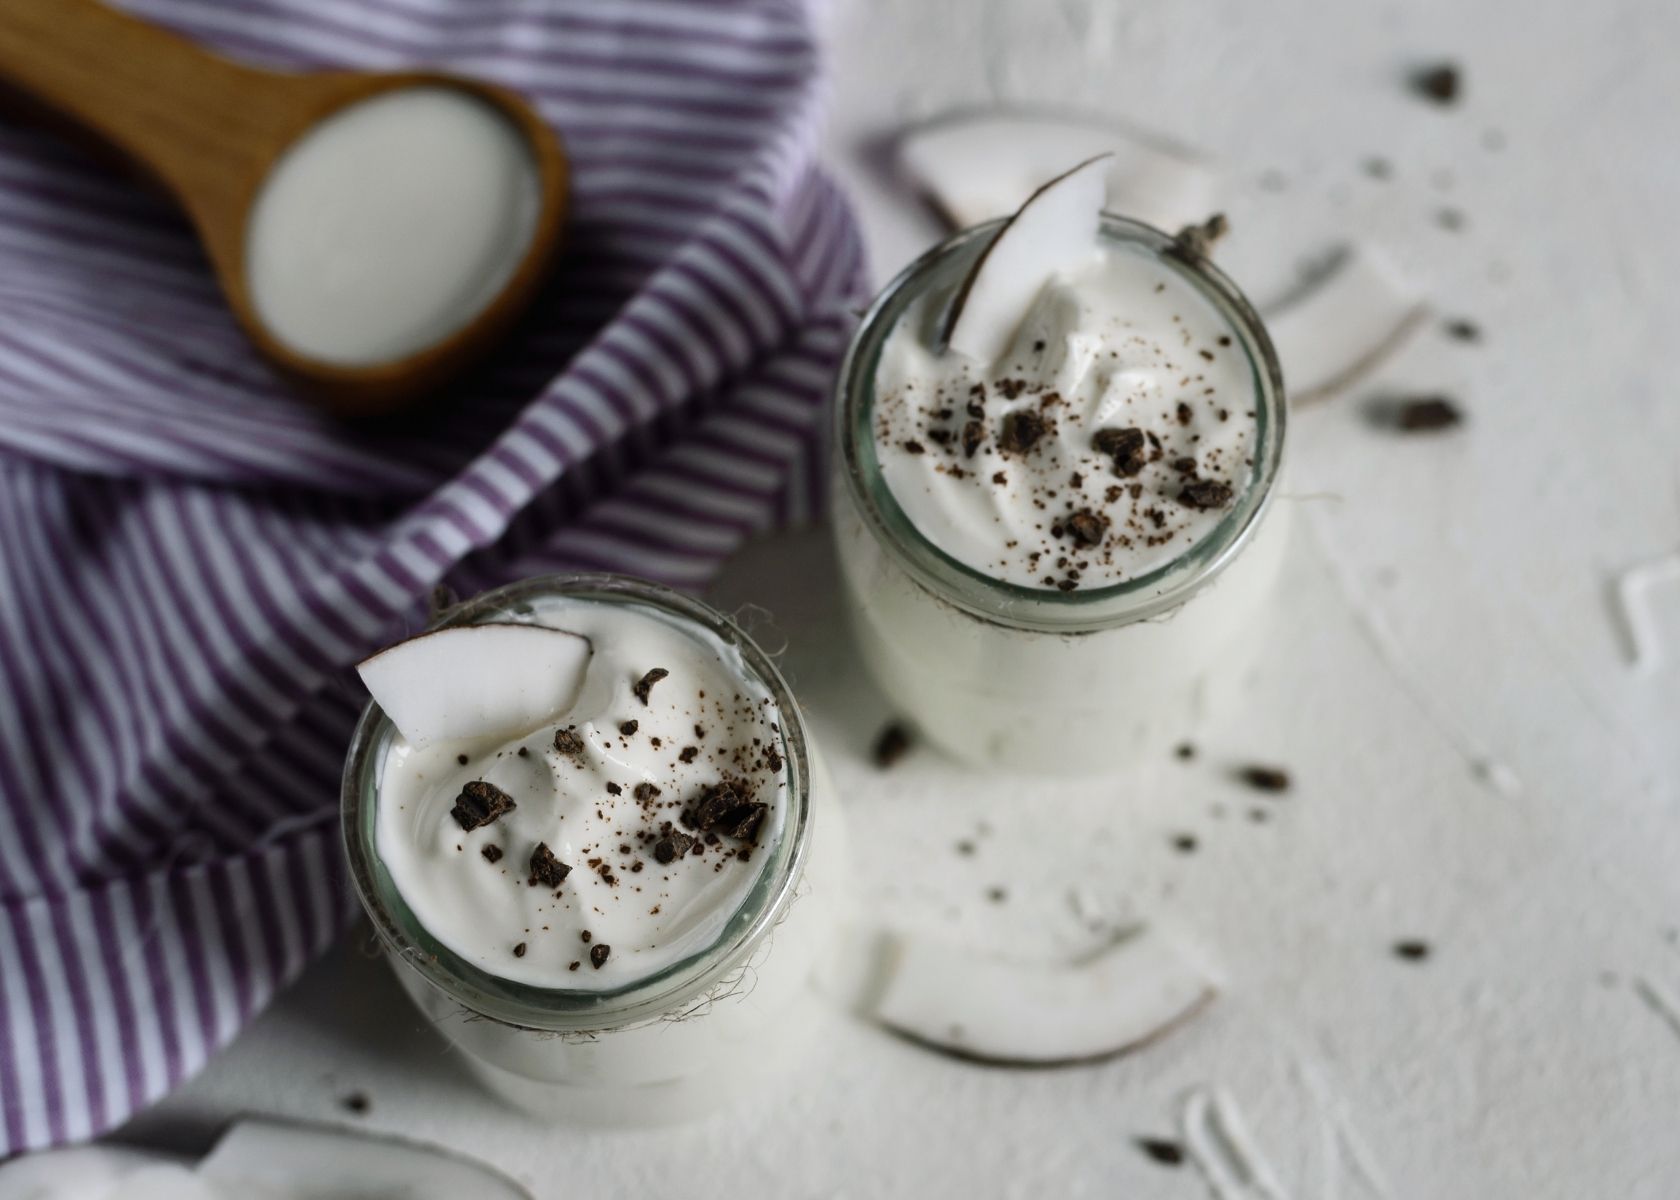 Vegan yogurt in two clear glass jars with coconut and cocoa garnish.